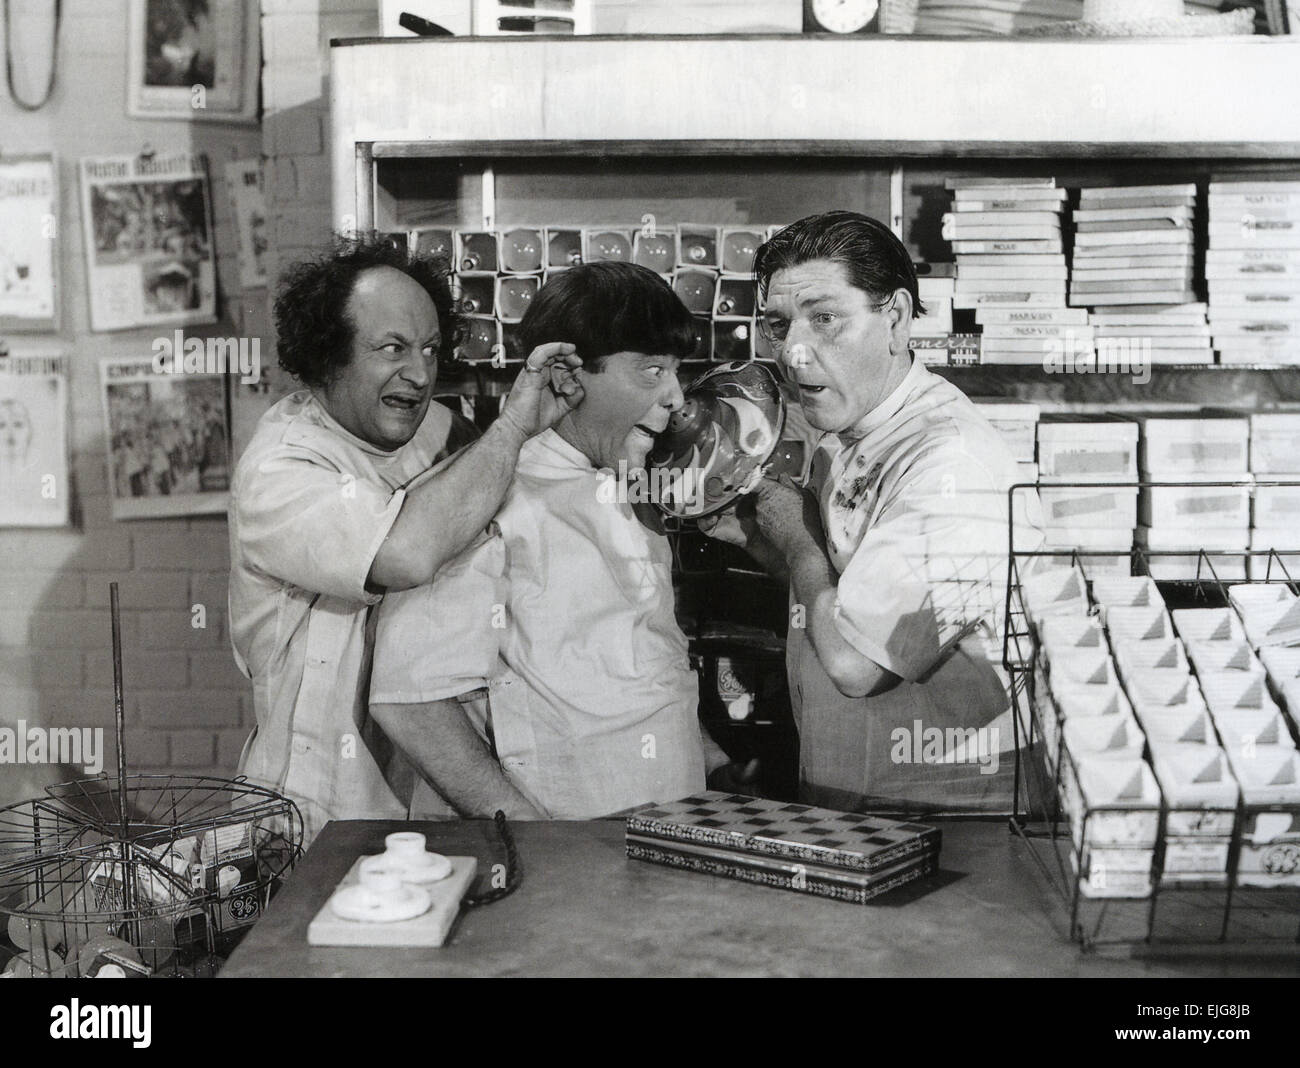 THE THREE STOOGES American film comic trio about 1960. From left: Larry Fine, Curly Howard, Moe Howard Stock Photo